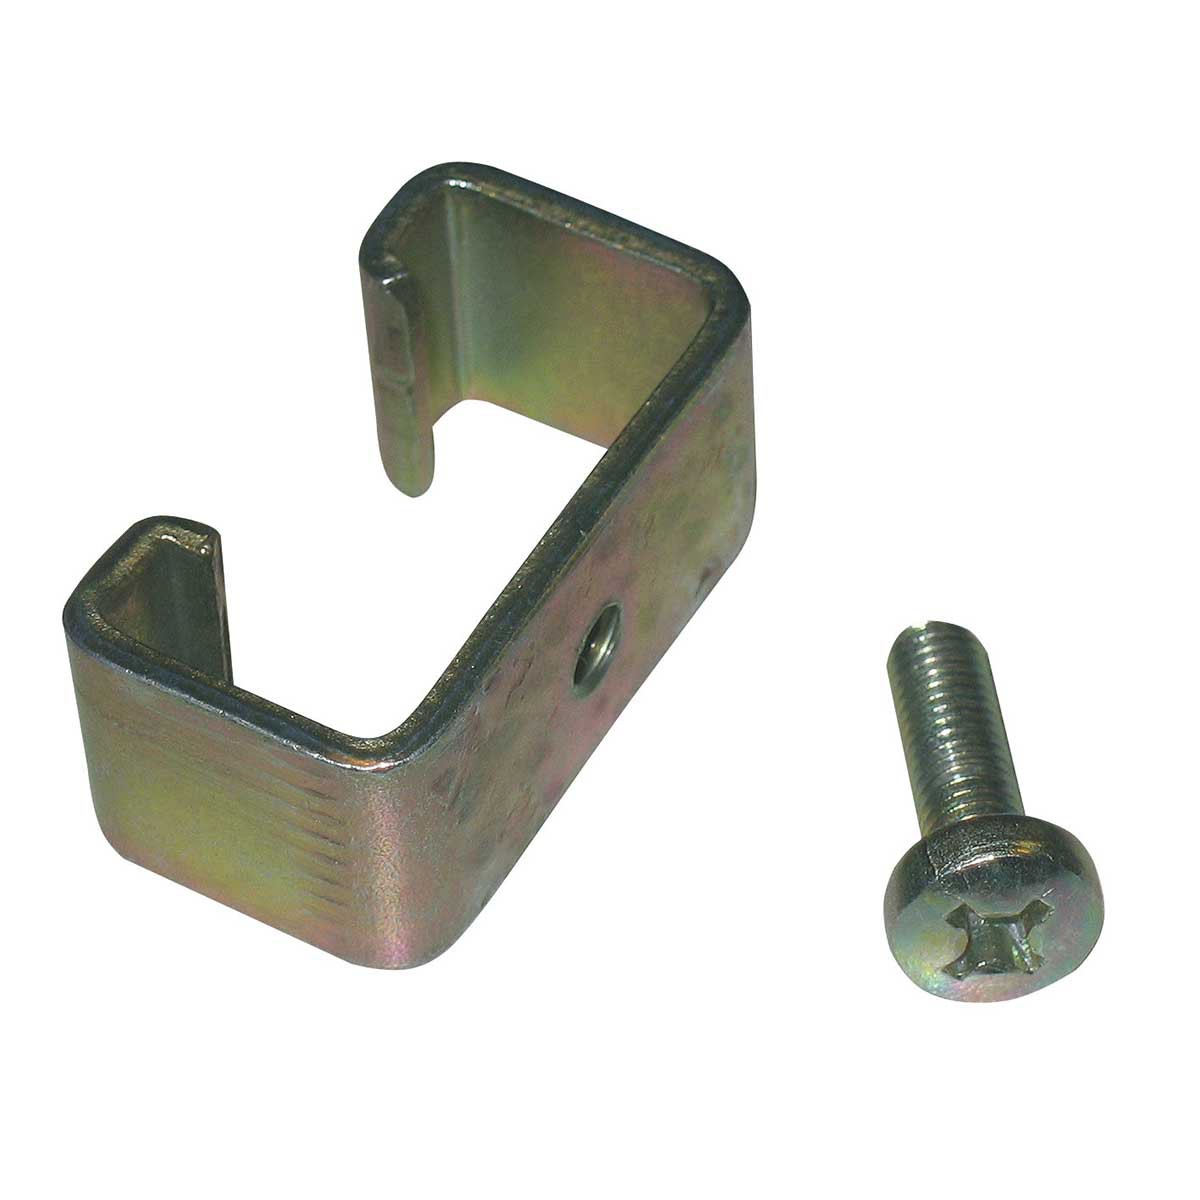 T-post universal clamp Kit T-post (6mm hole)